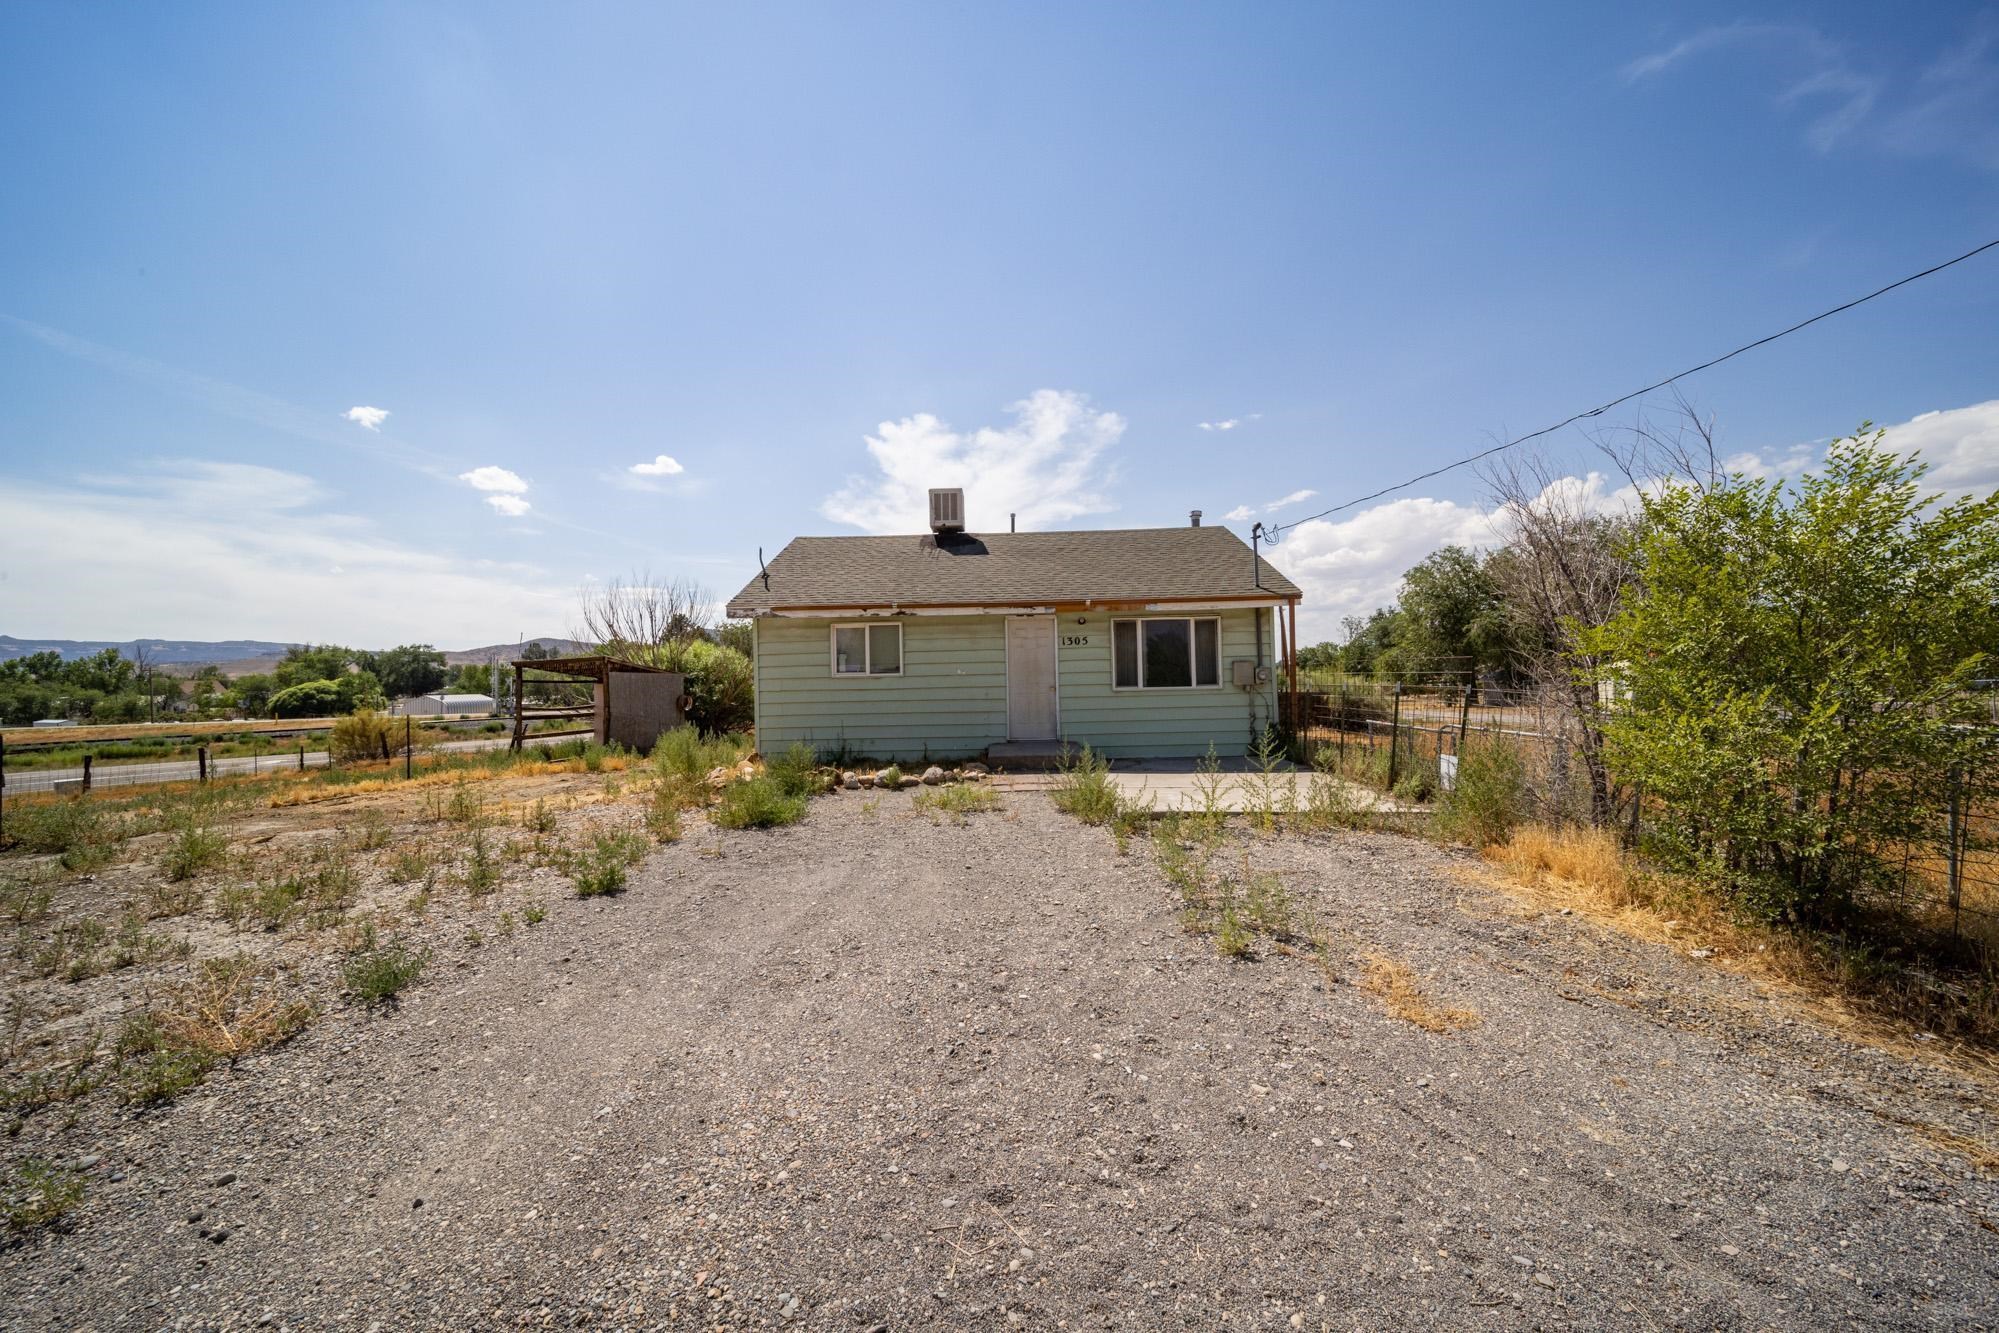 This 672 Sq ft home has 2 bedrooms and 1 full bathroom. Sitting on over 1/2 acre and WITHOUT an HOA, this one won't last long! Swamp Cooler on roof is no longer in use and house has been converted to central air.